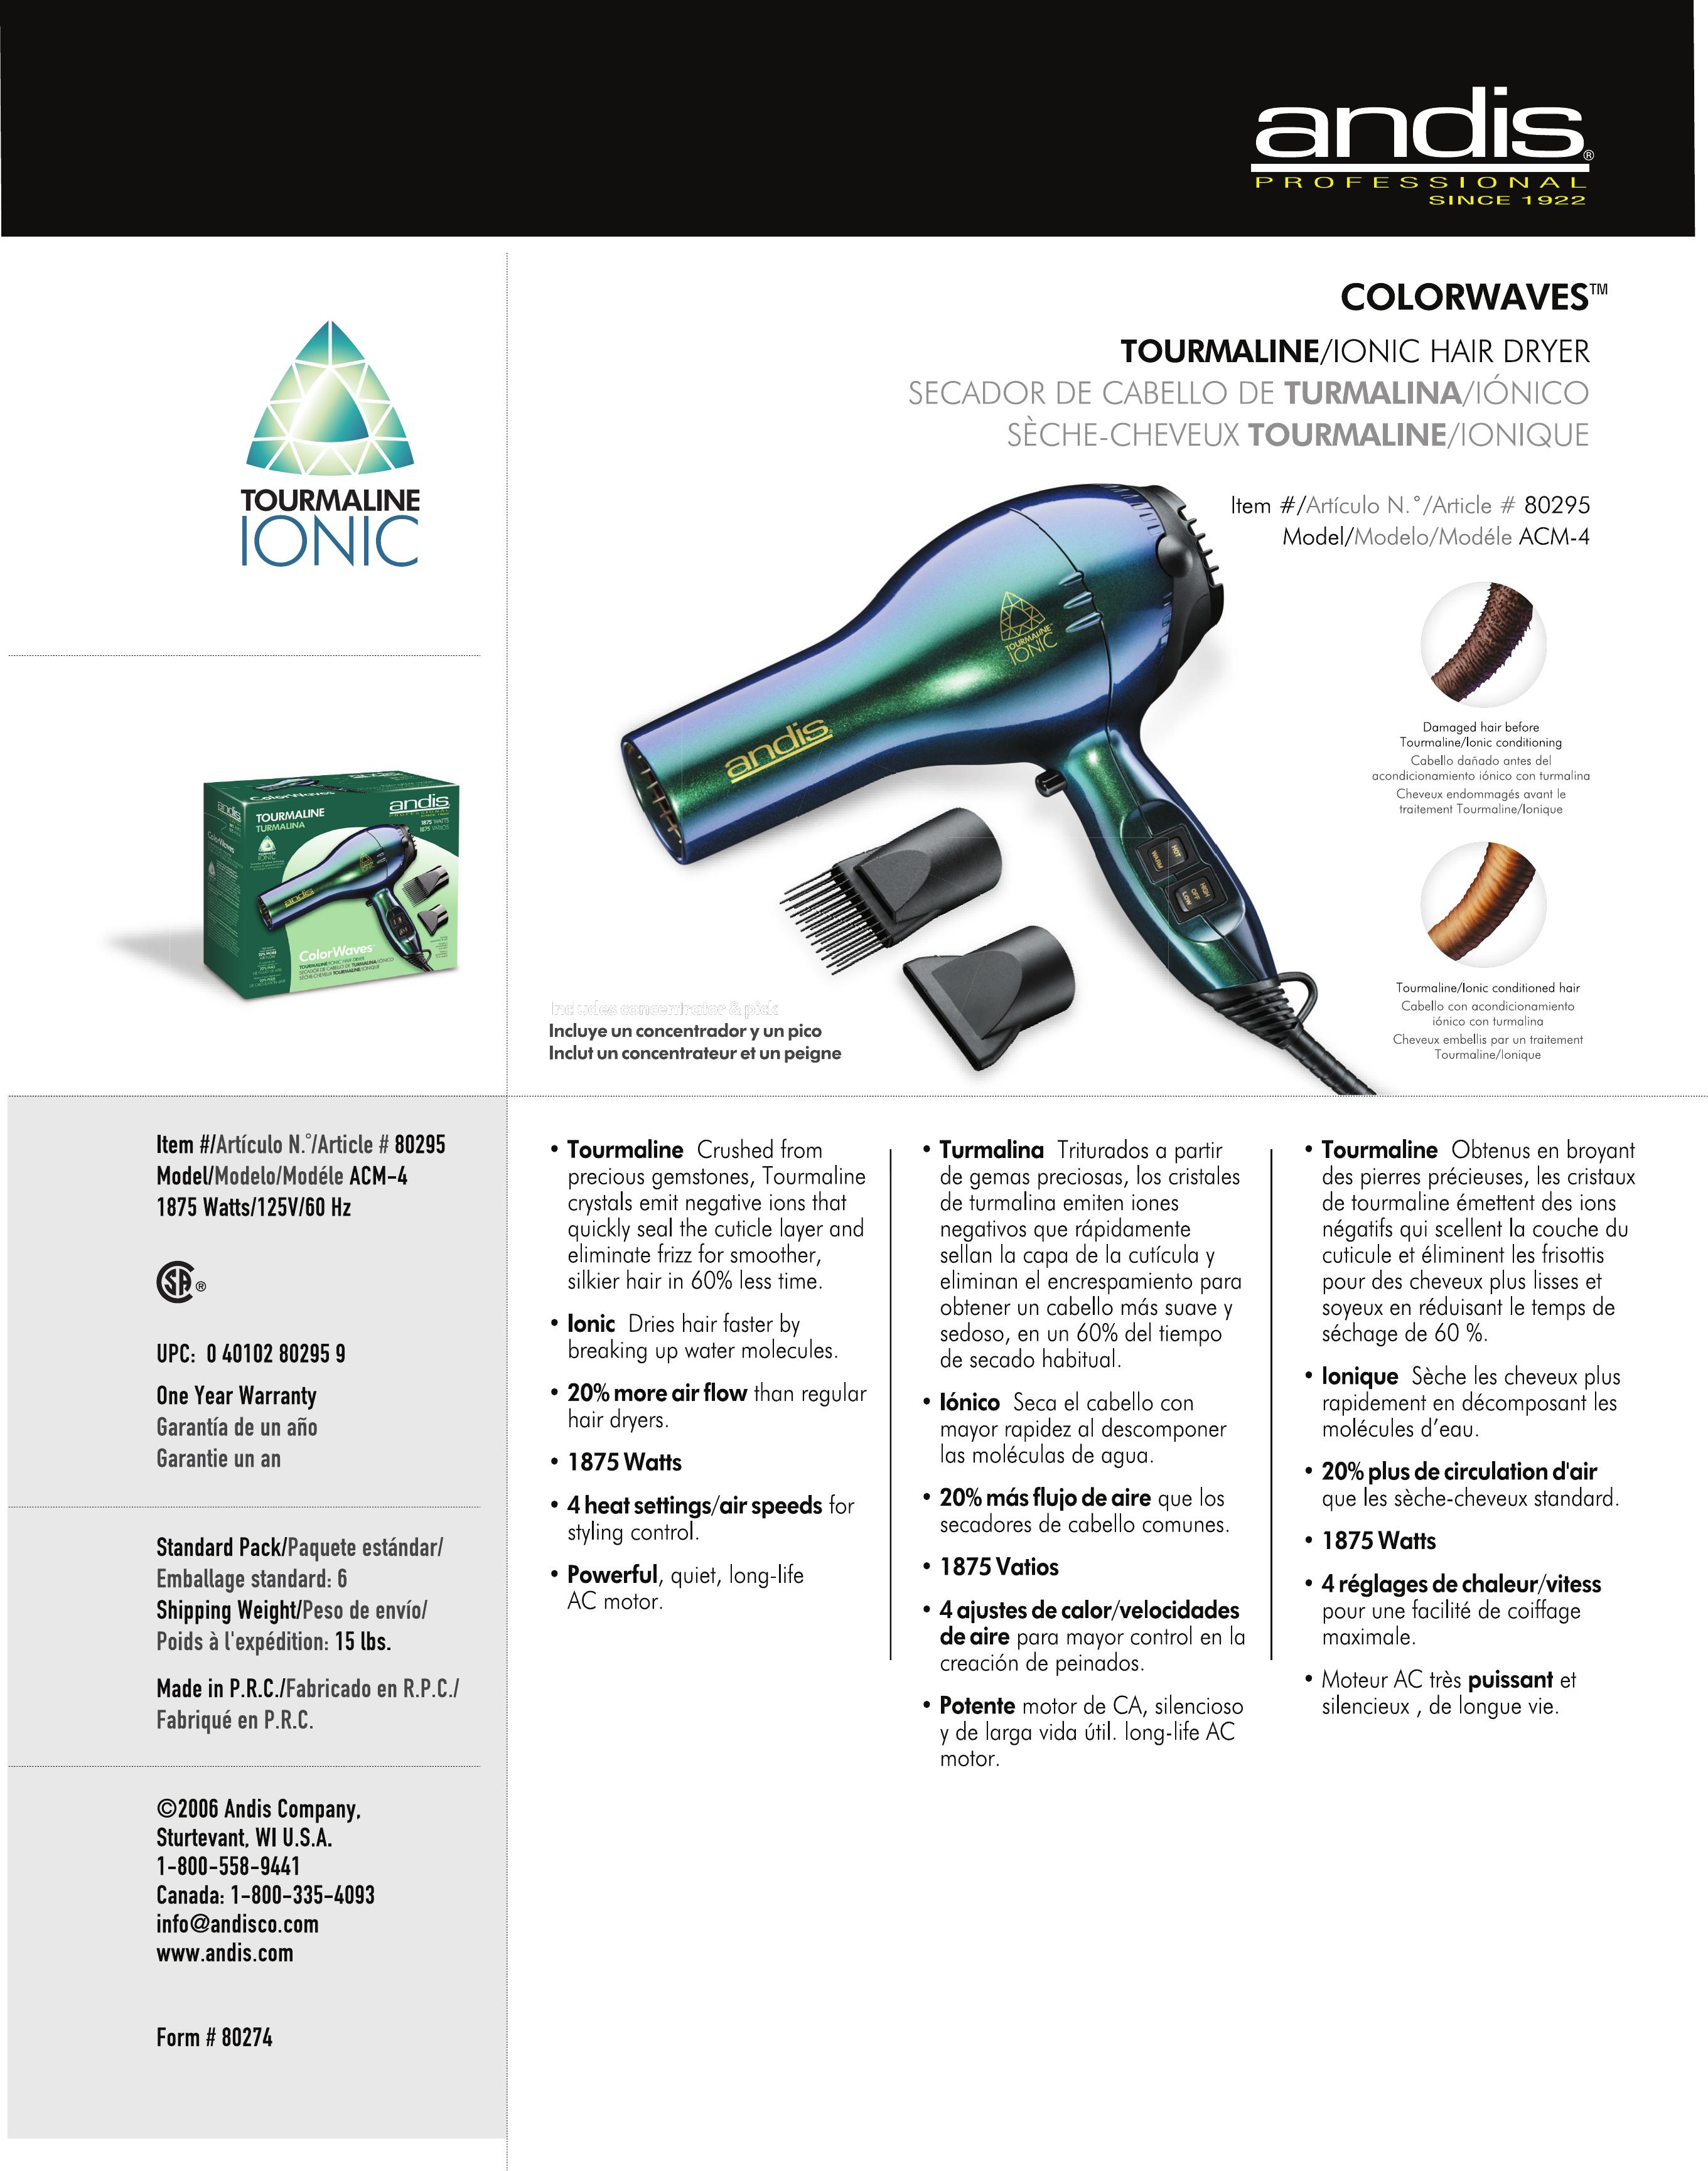 Andis Company ACM-4 Hair Dryer User Manual